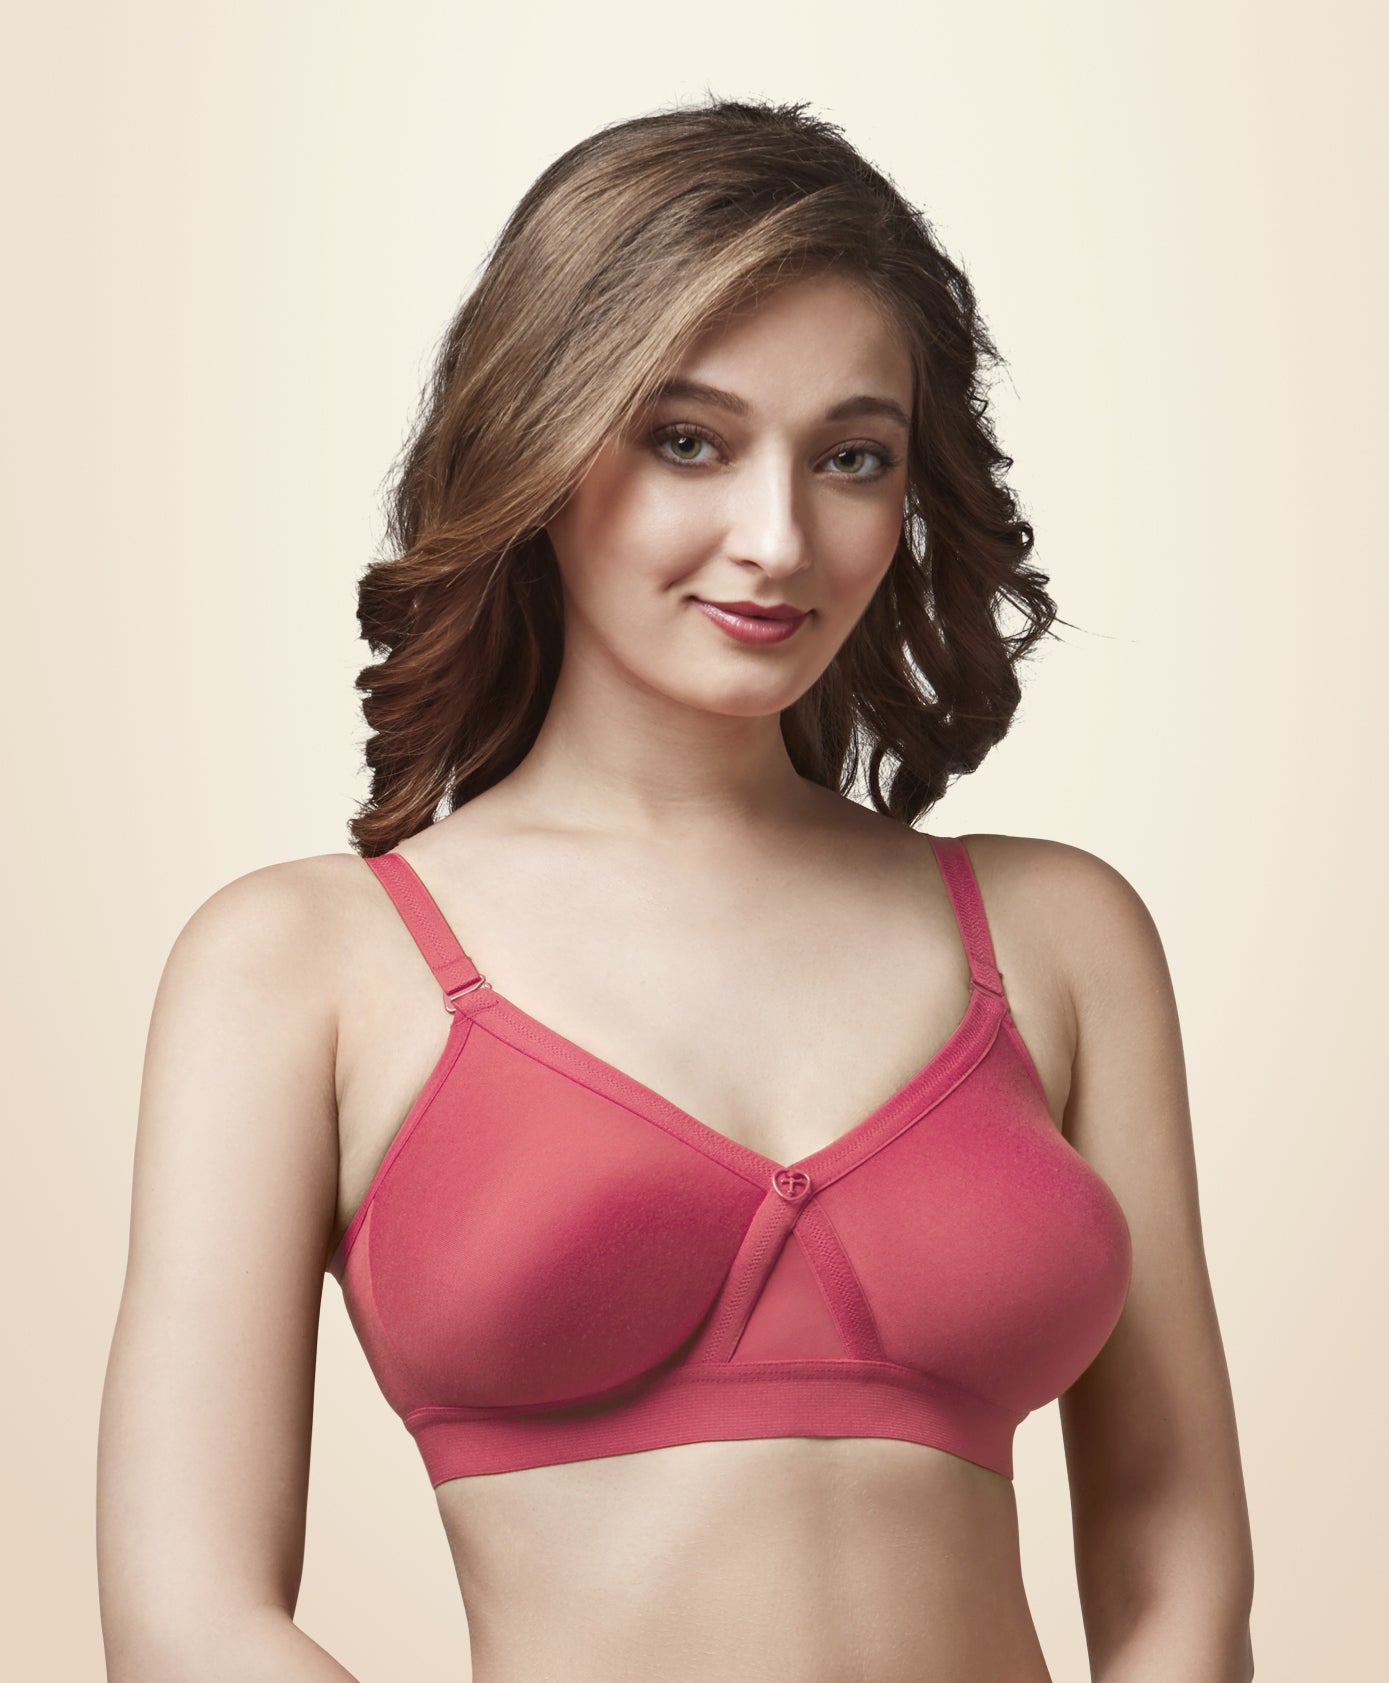 Buy Trylo Touche Woman Soft Padded Full Cup Bra - White Online